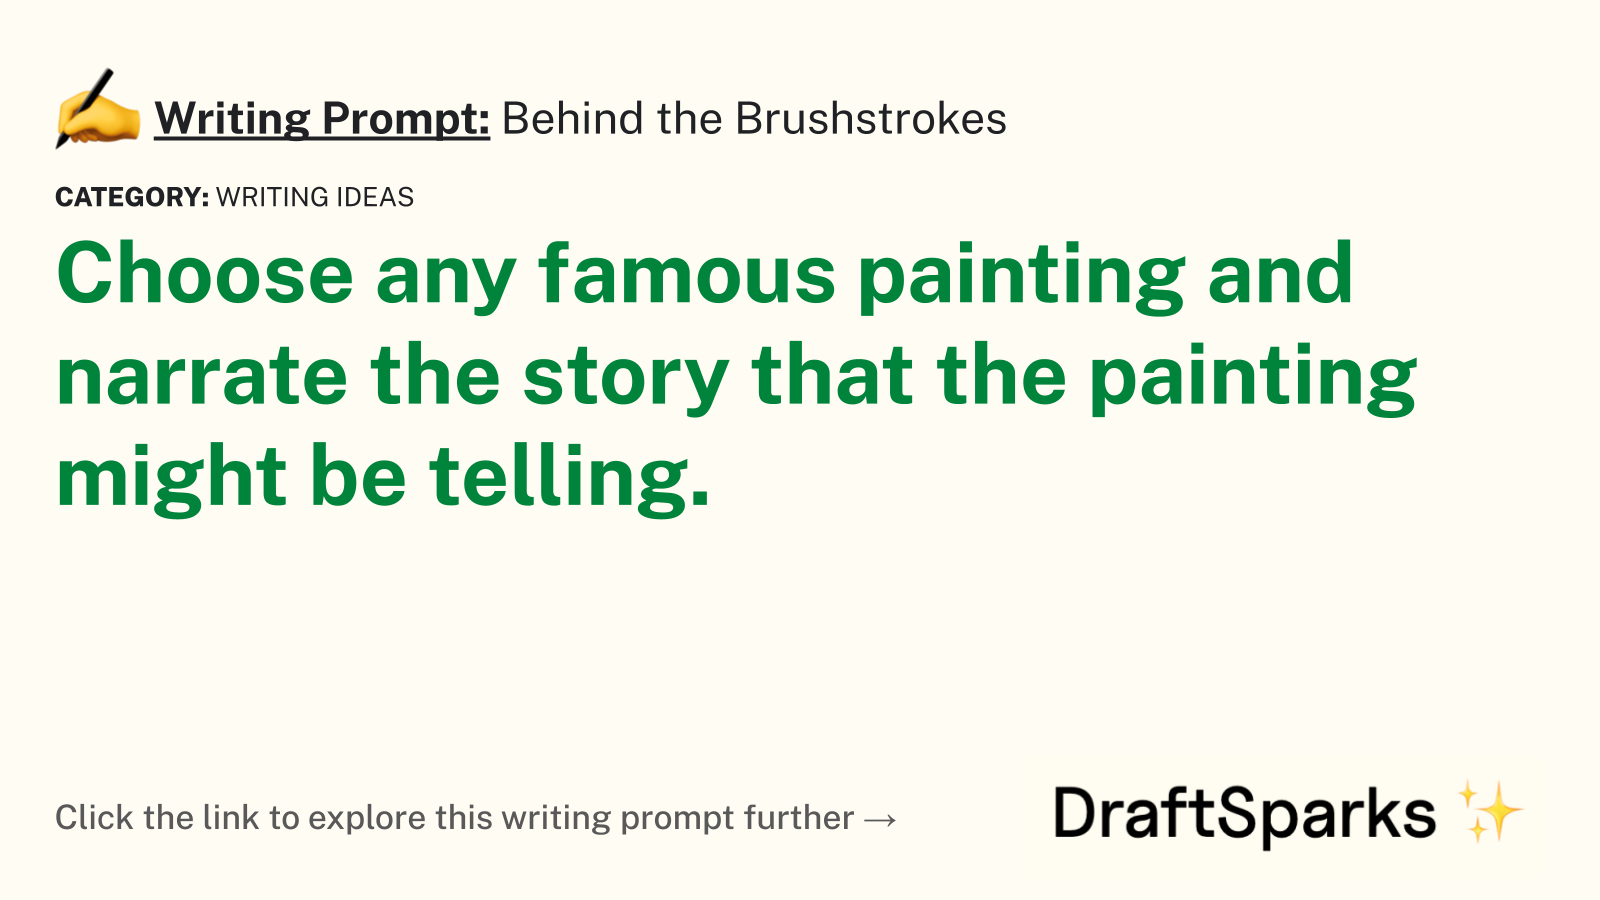 Behind the Brushstrokes